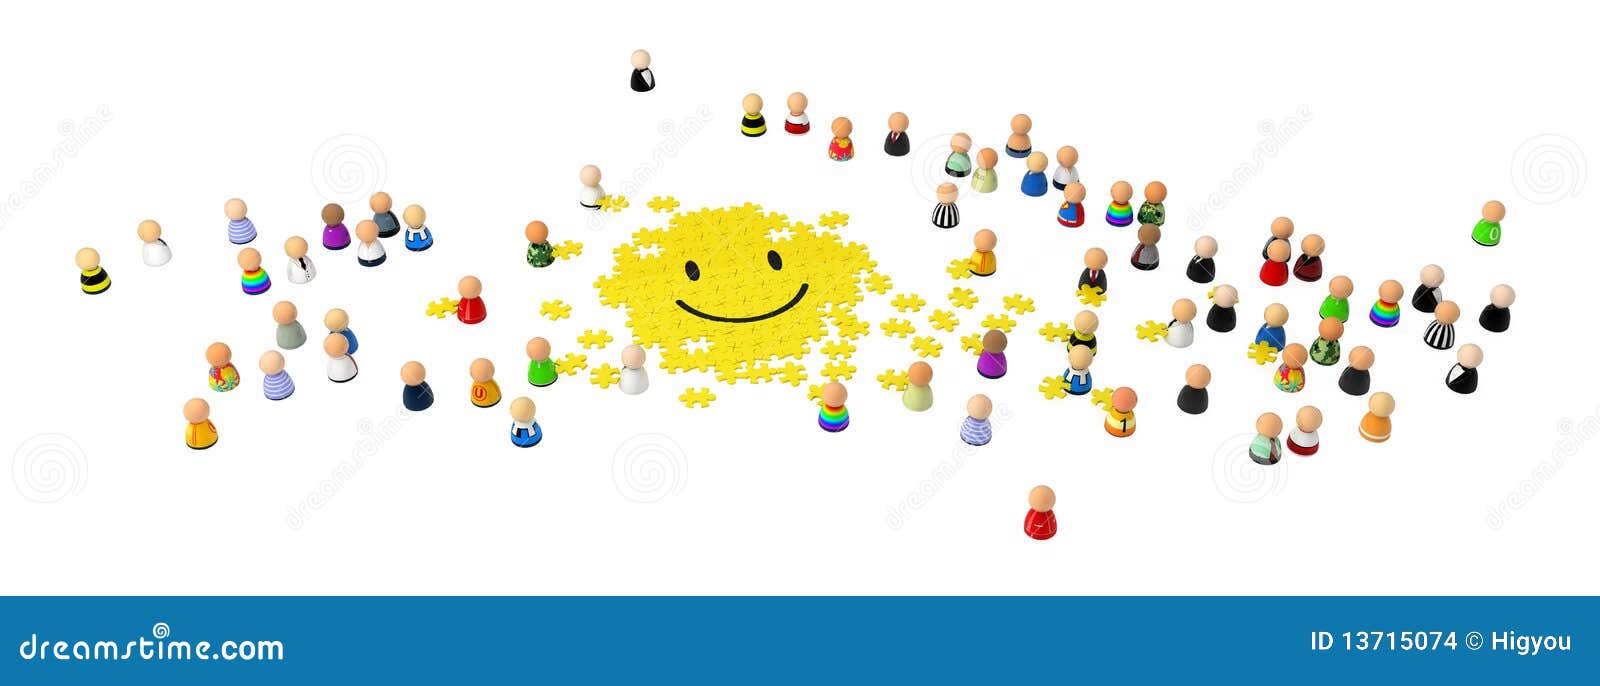 Cartoon Crowd, Smiley Jigsaw. Crowd of small symbolic 3d figures, over white